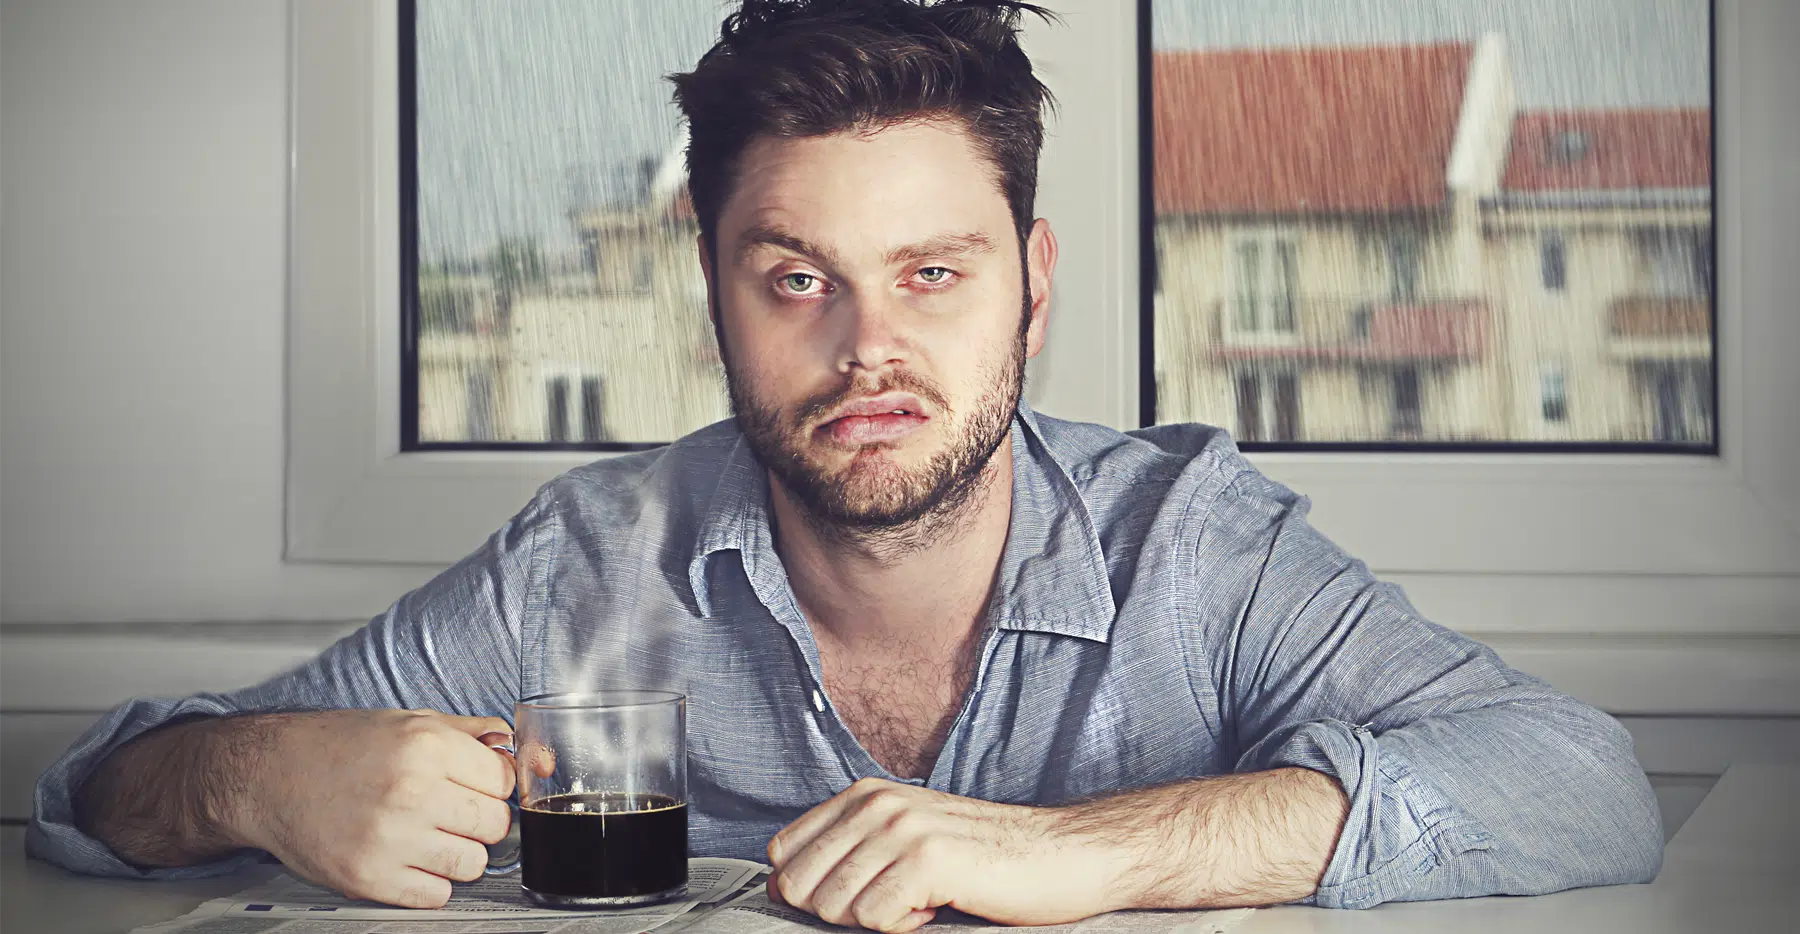 The Worst Jobs to Have While Hungover